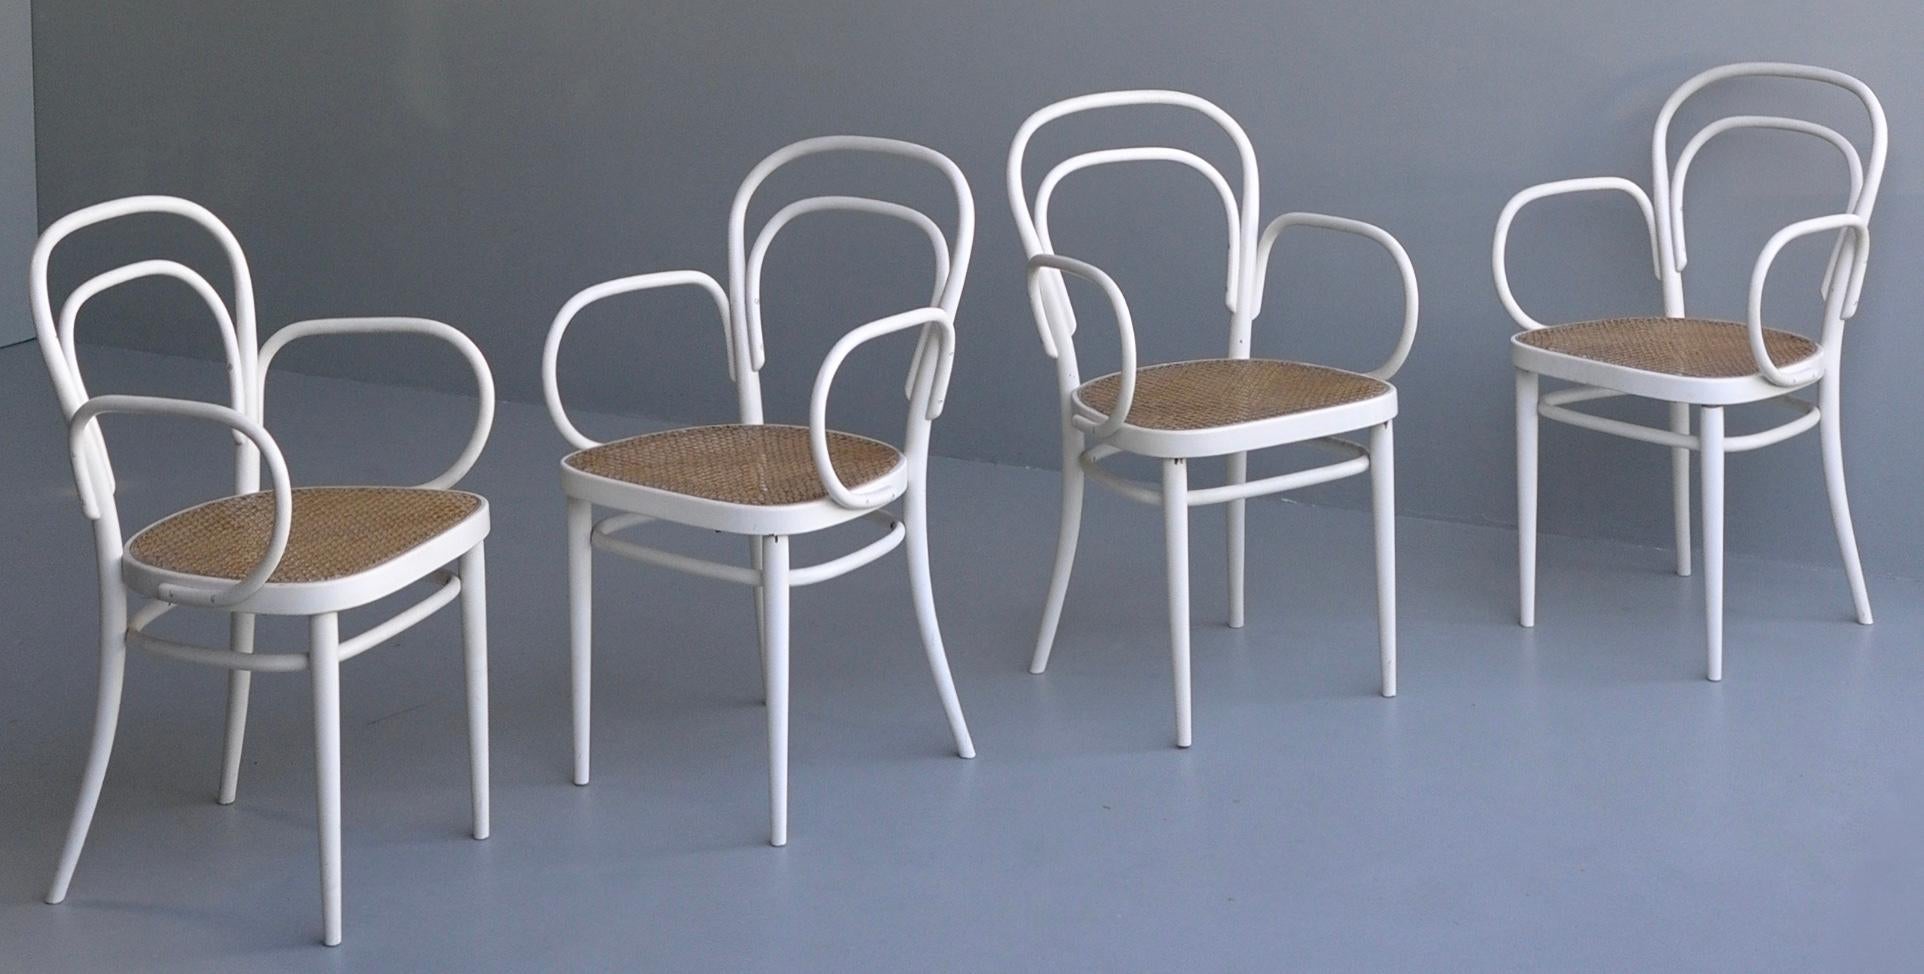 Set of Four White Thonet nr. 14 Armchairs with Wicker Seats, Vienna, 1960s For Sale 3